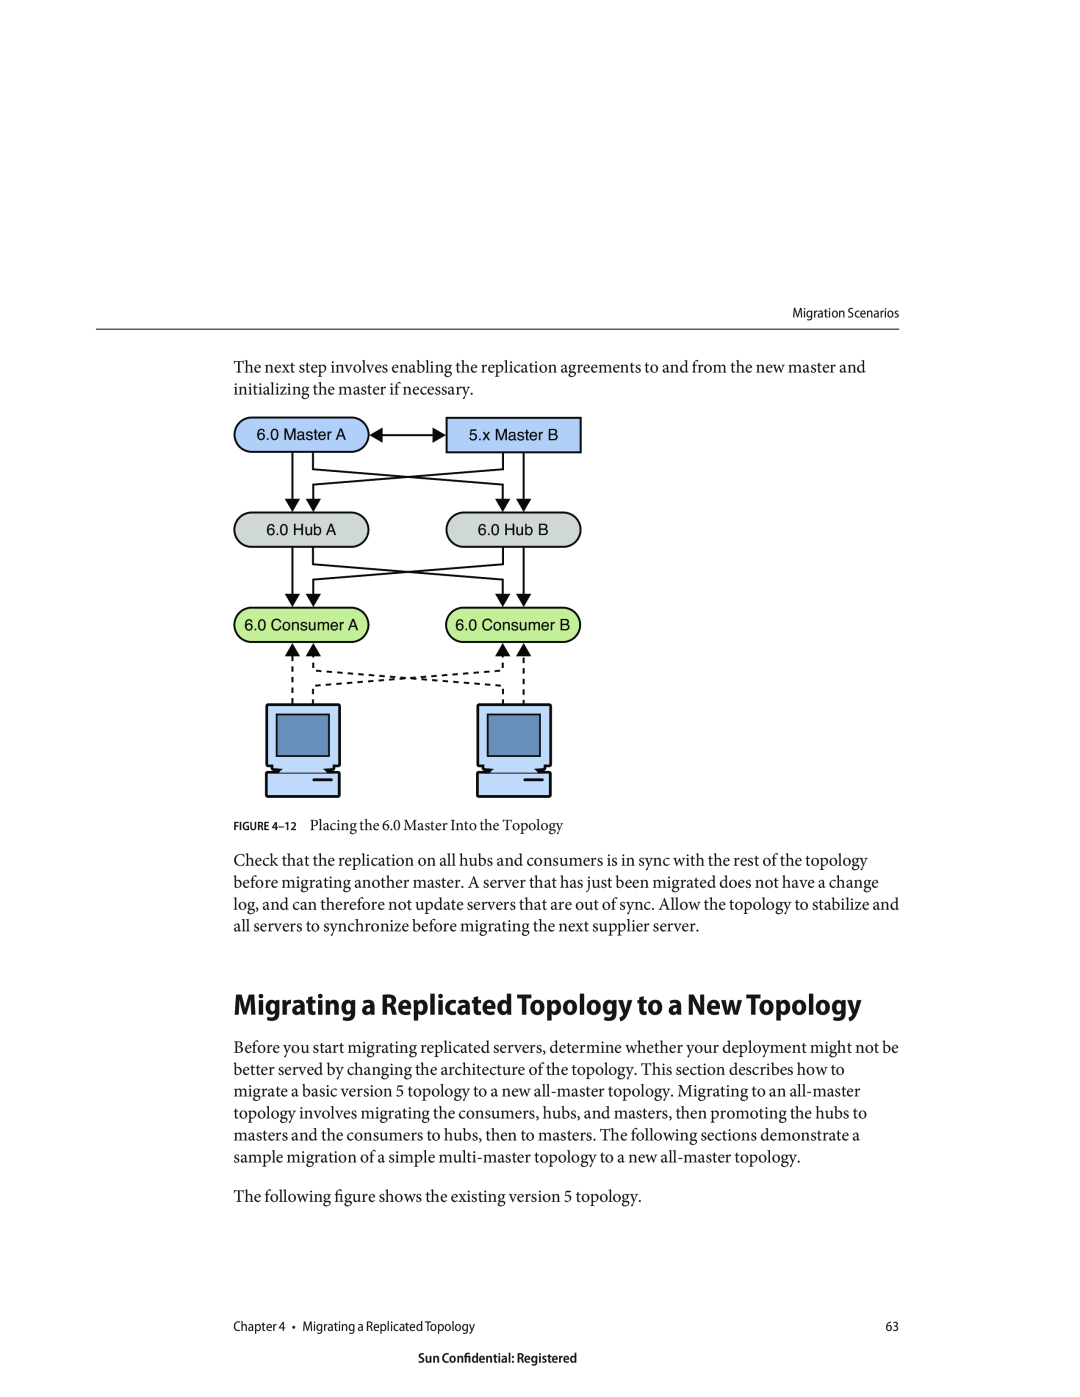 Sun Microsystems 8190994 manual Migrating a Replicated Topology to a New Topology 